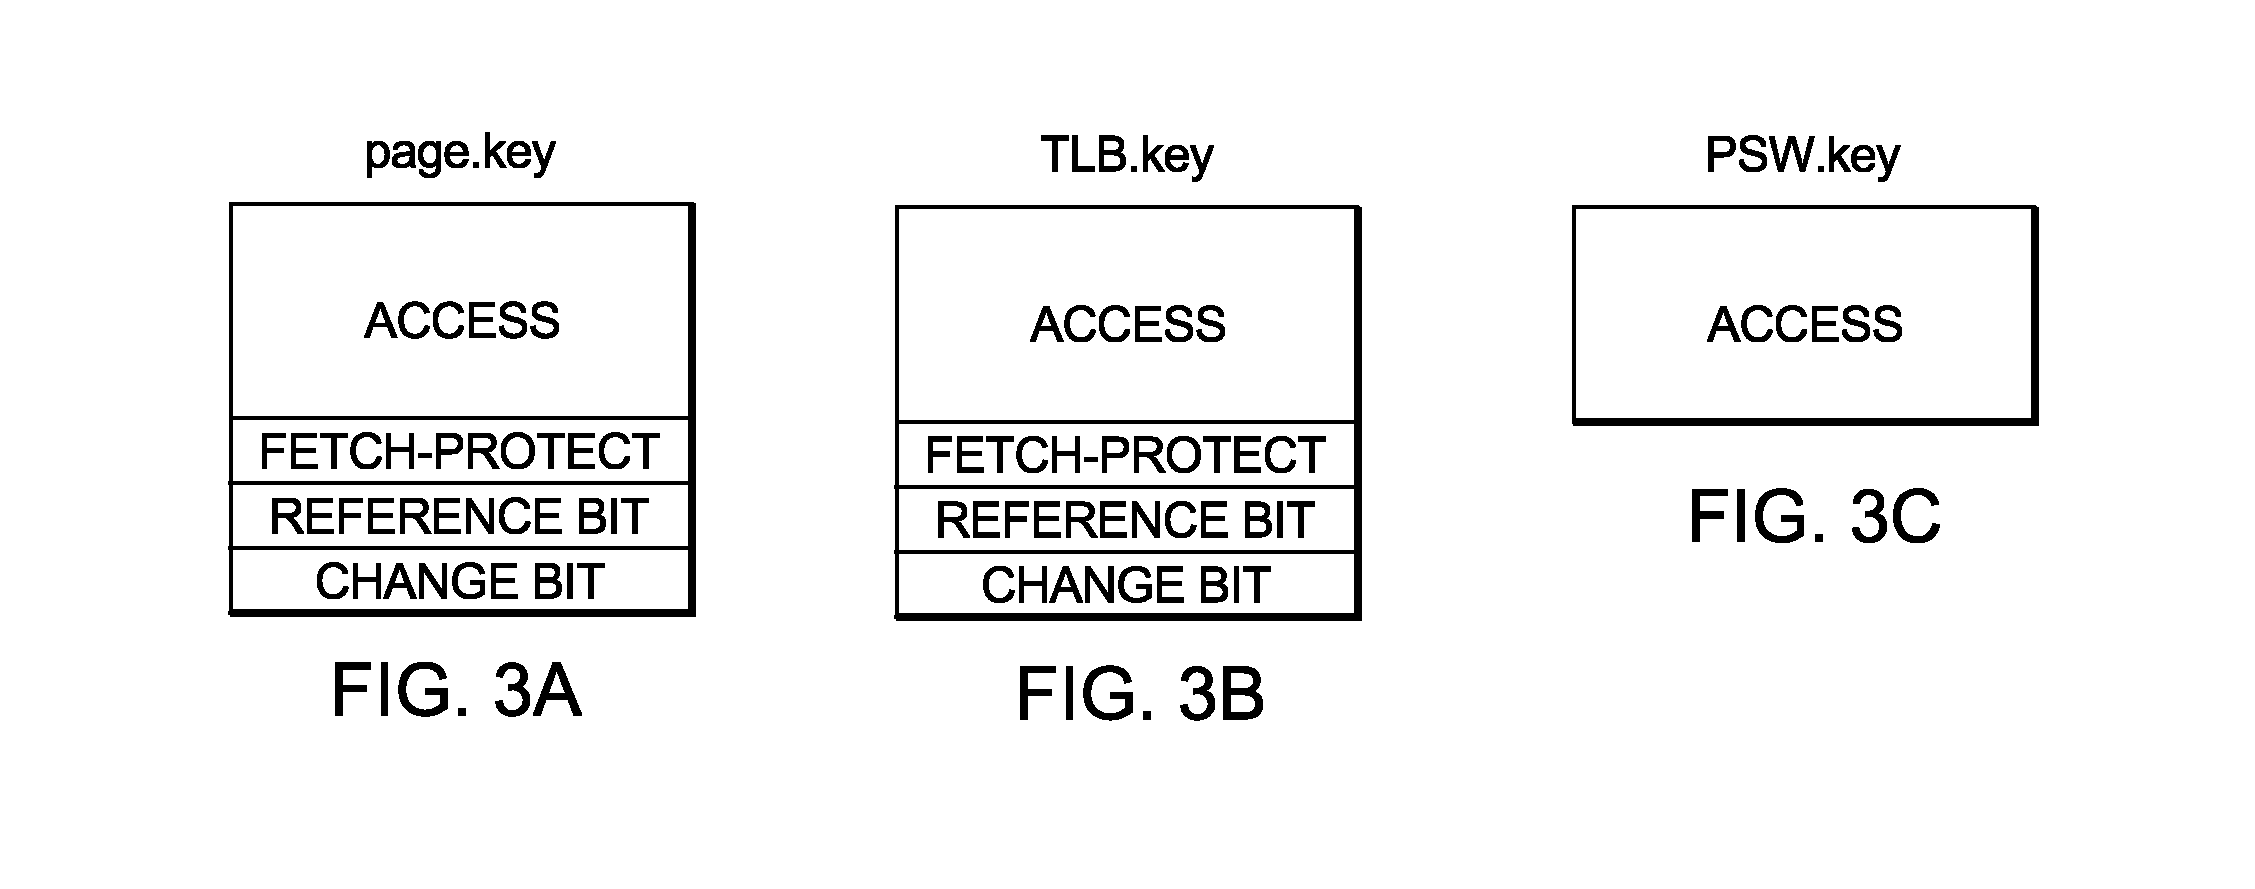 Reducing interprocessor communications pursuant to updating of a storage key